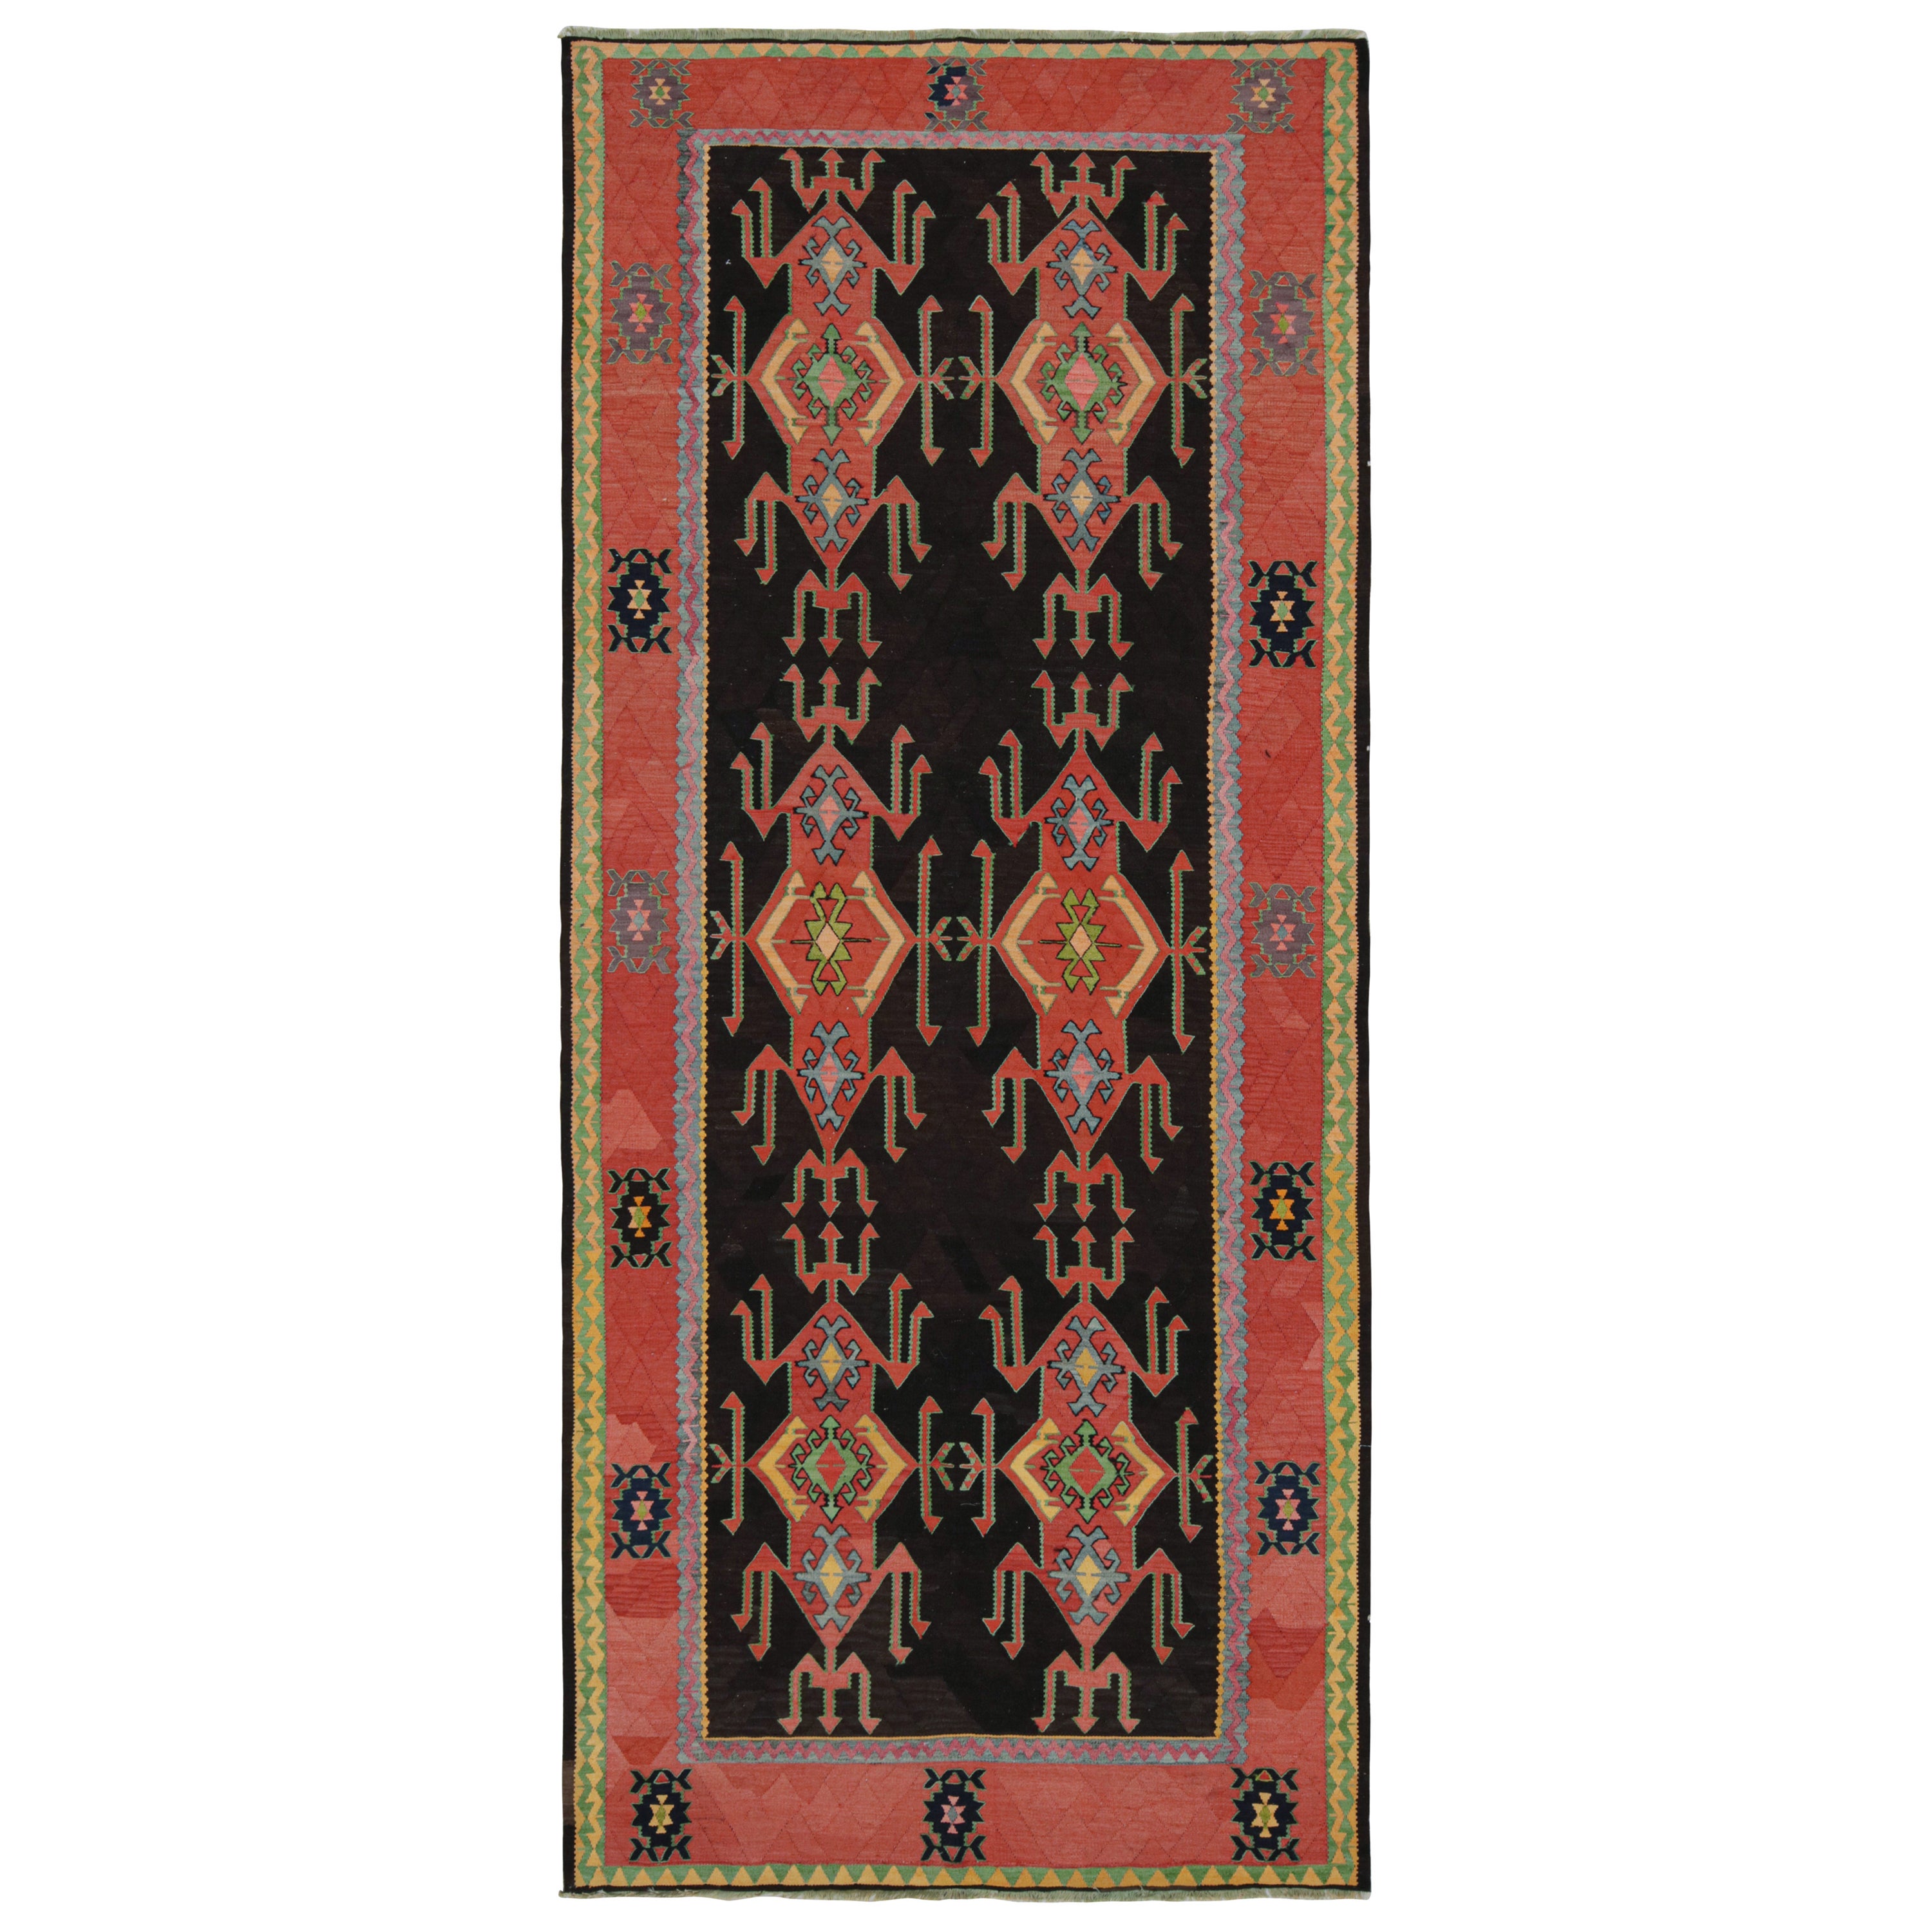 Vintage Persian Kilim with Red Patterns on a Black Field, from Rug & Kilim For Sale